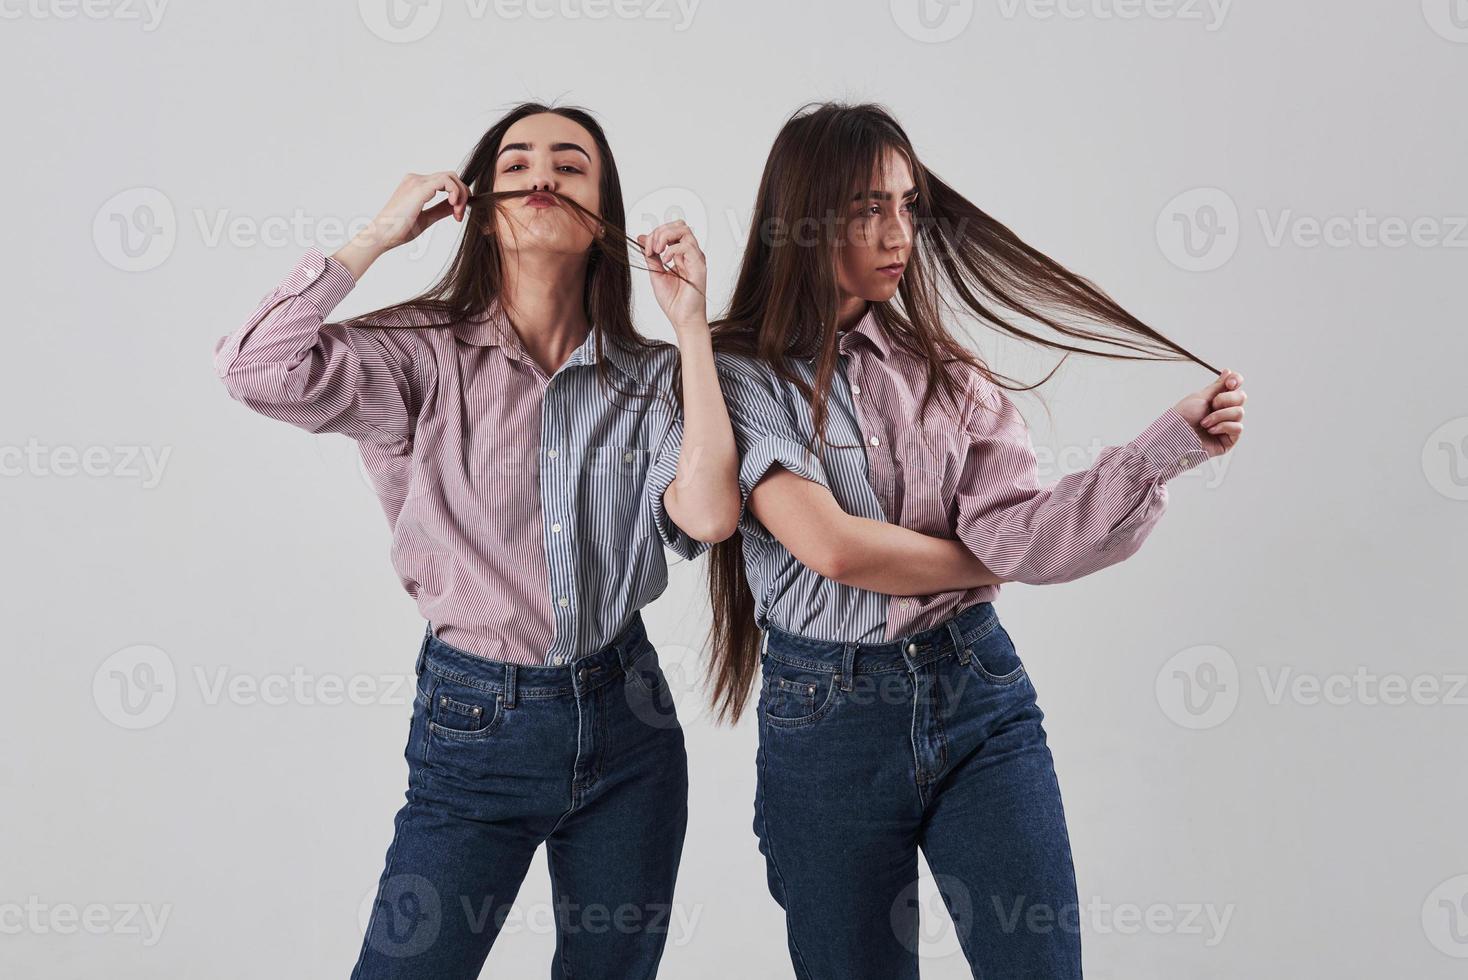 Just fooling around. Two sisters twins standing and posing in the studio with white background photo